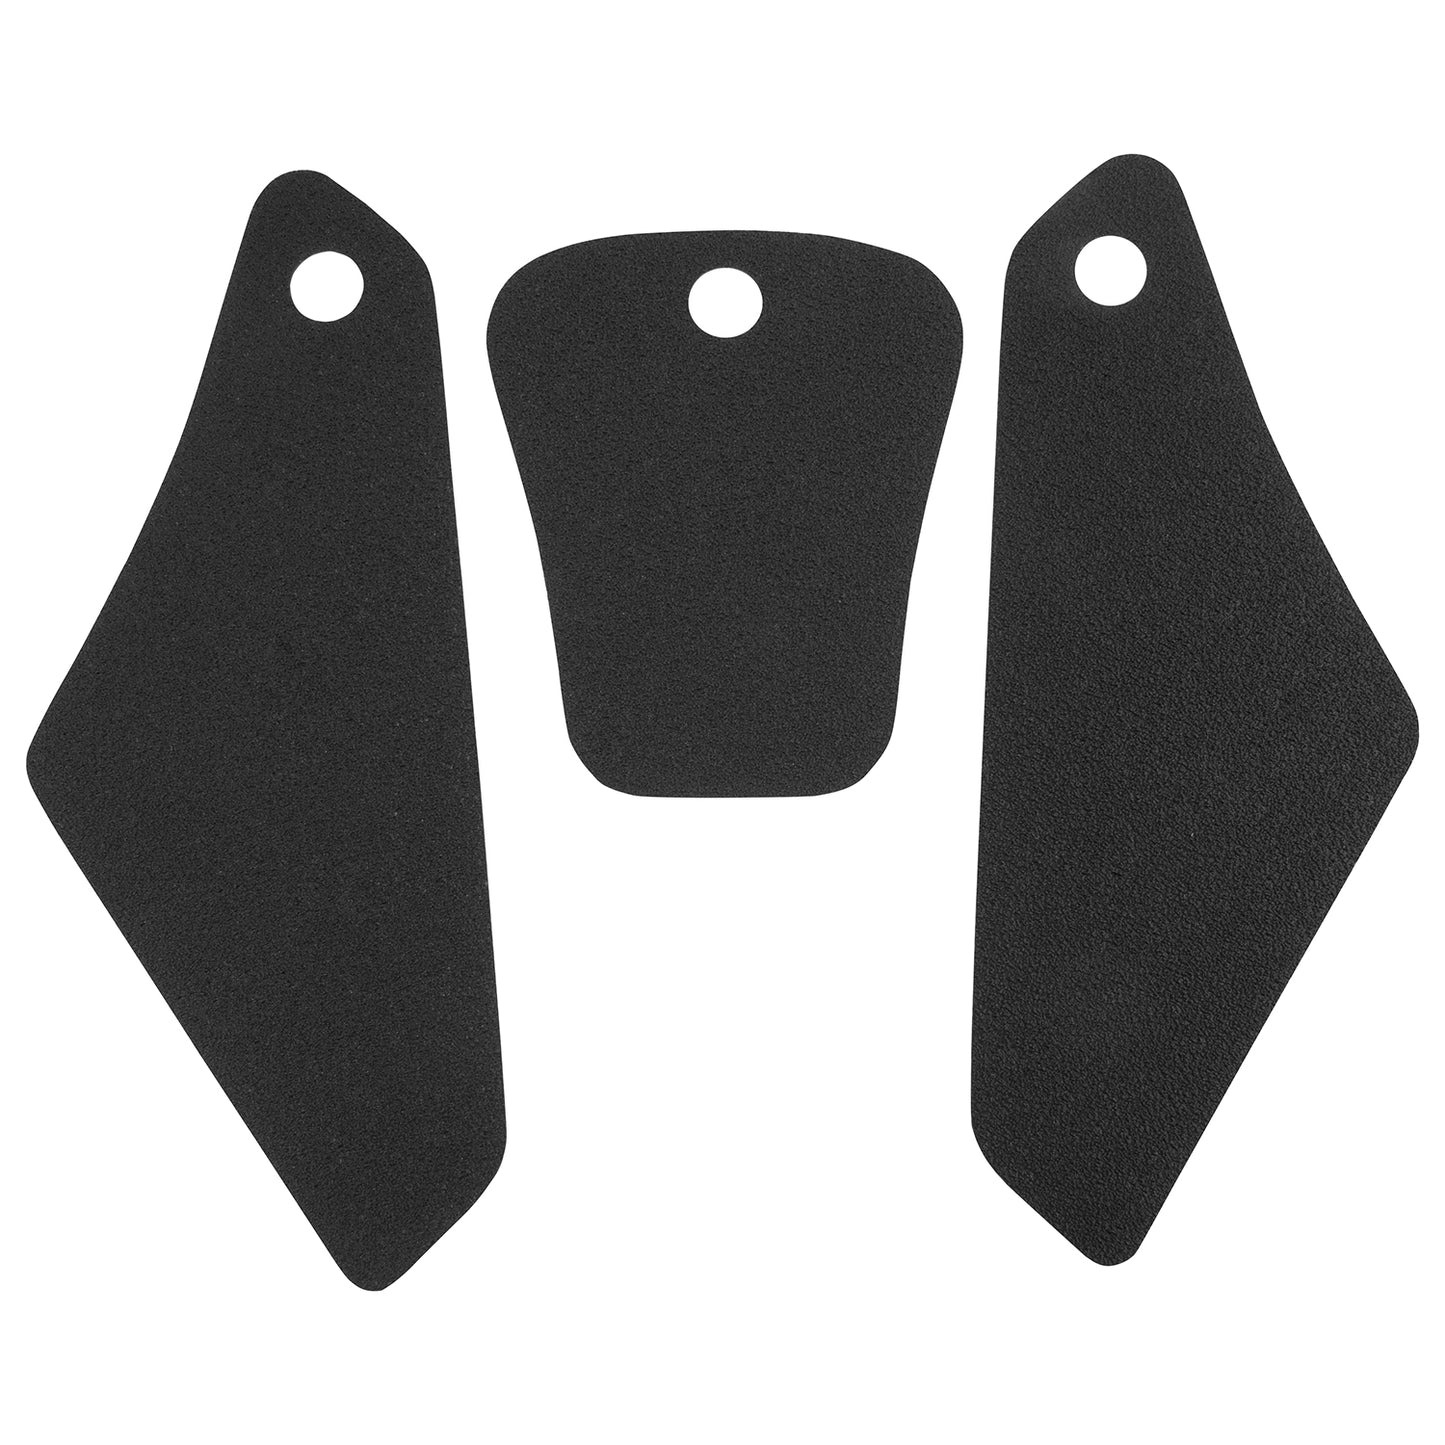 Wolfline Motorcycle Accessories Anti Slip Tank Pad Stickers Side Gas Tank Pad Knee Grip Decals Protection For BMW R1200GS 2004 2005 2006 2007 2008 2009 2010 2011 2012